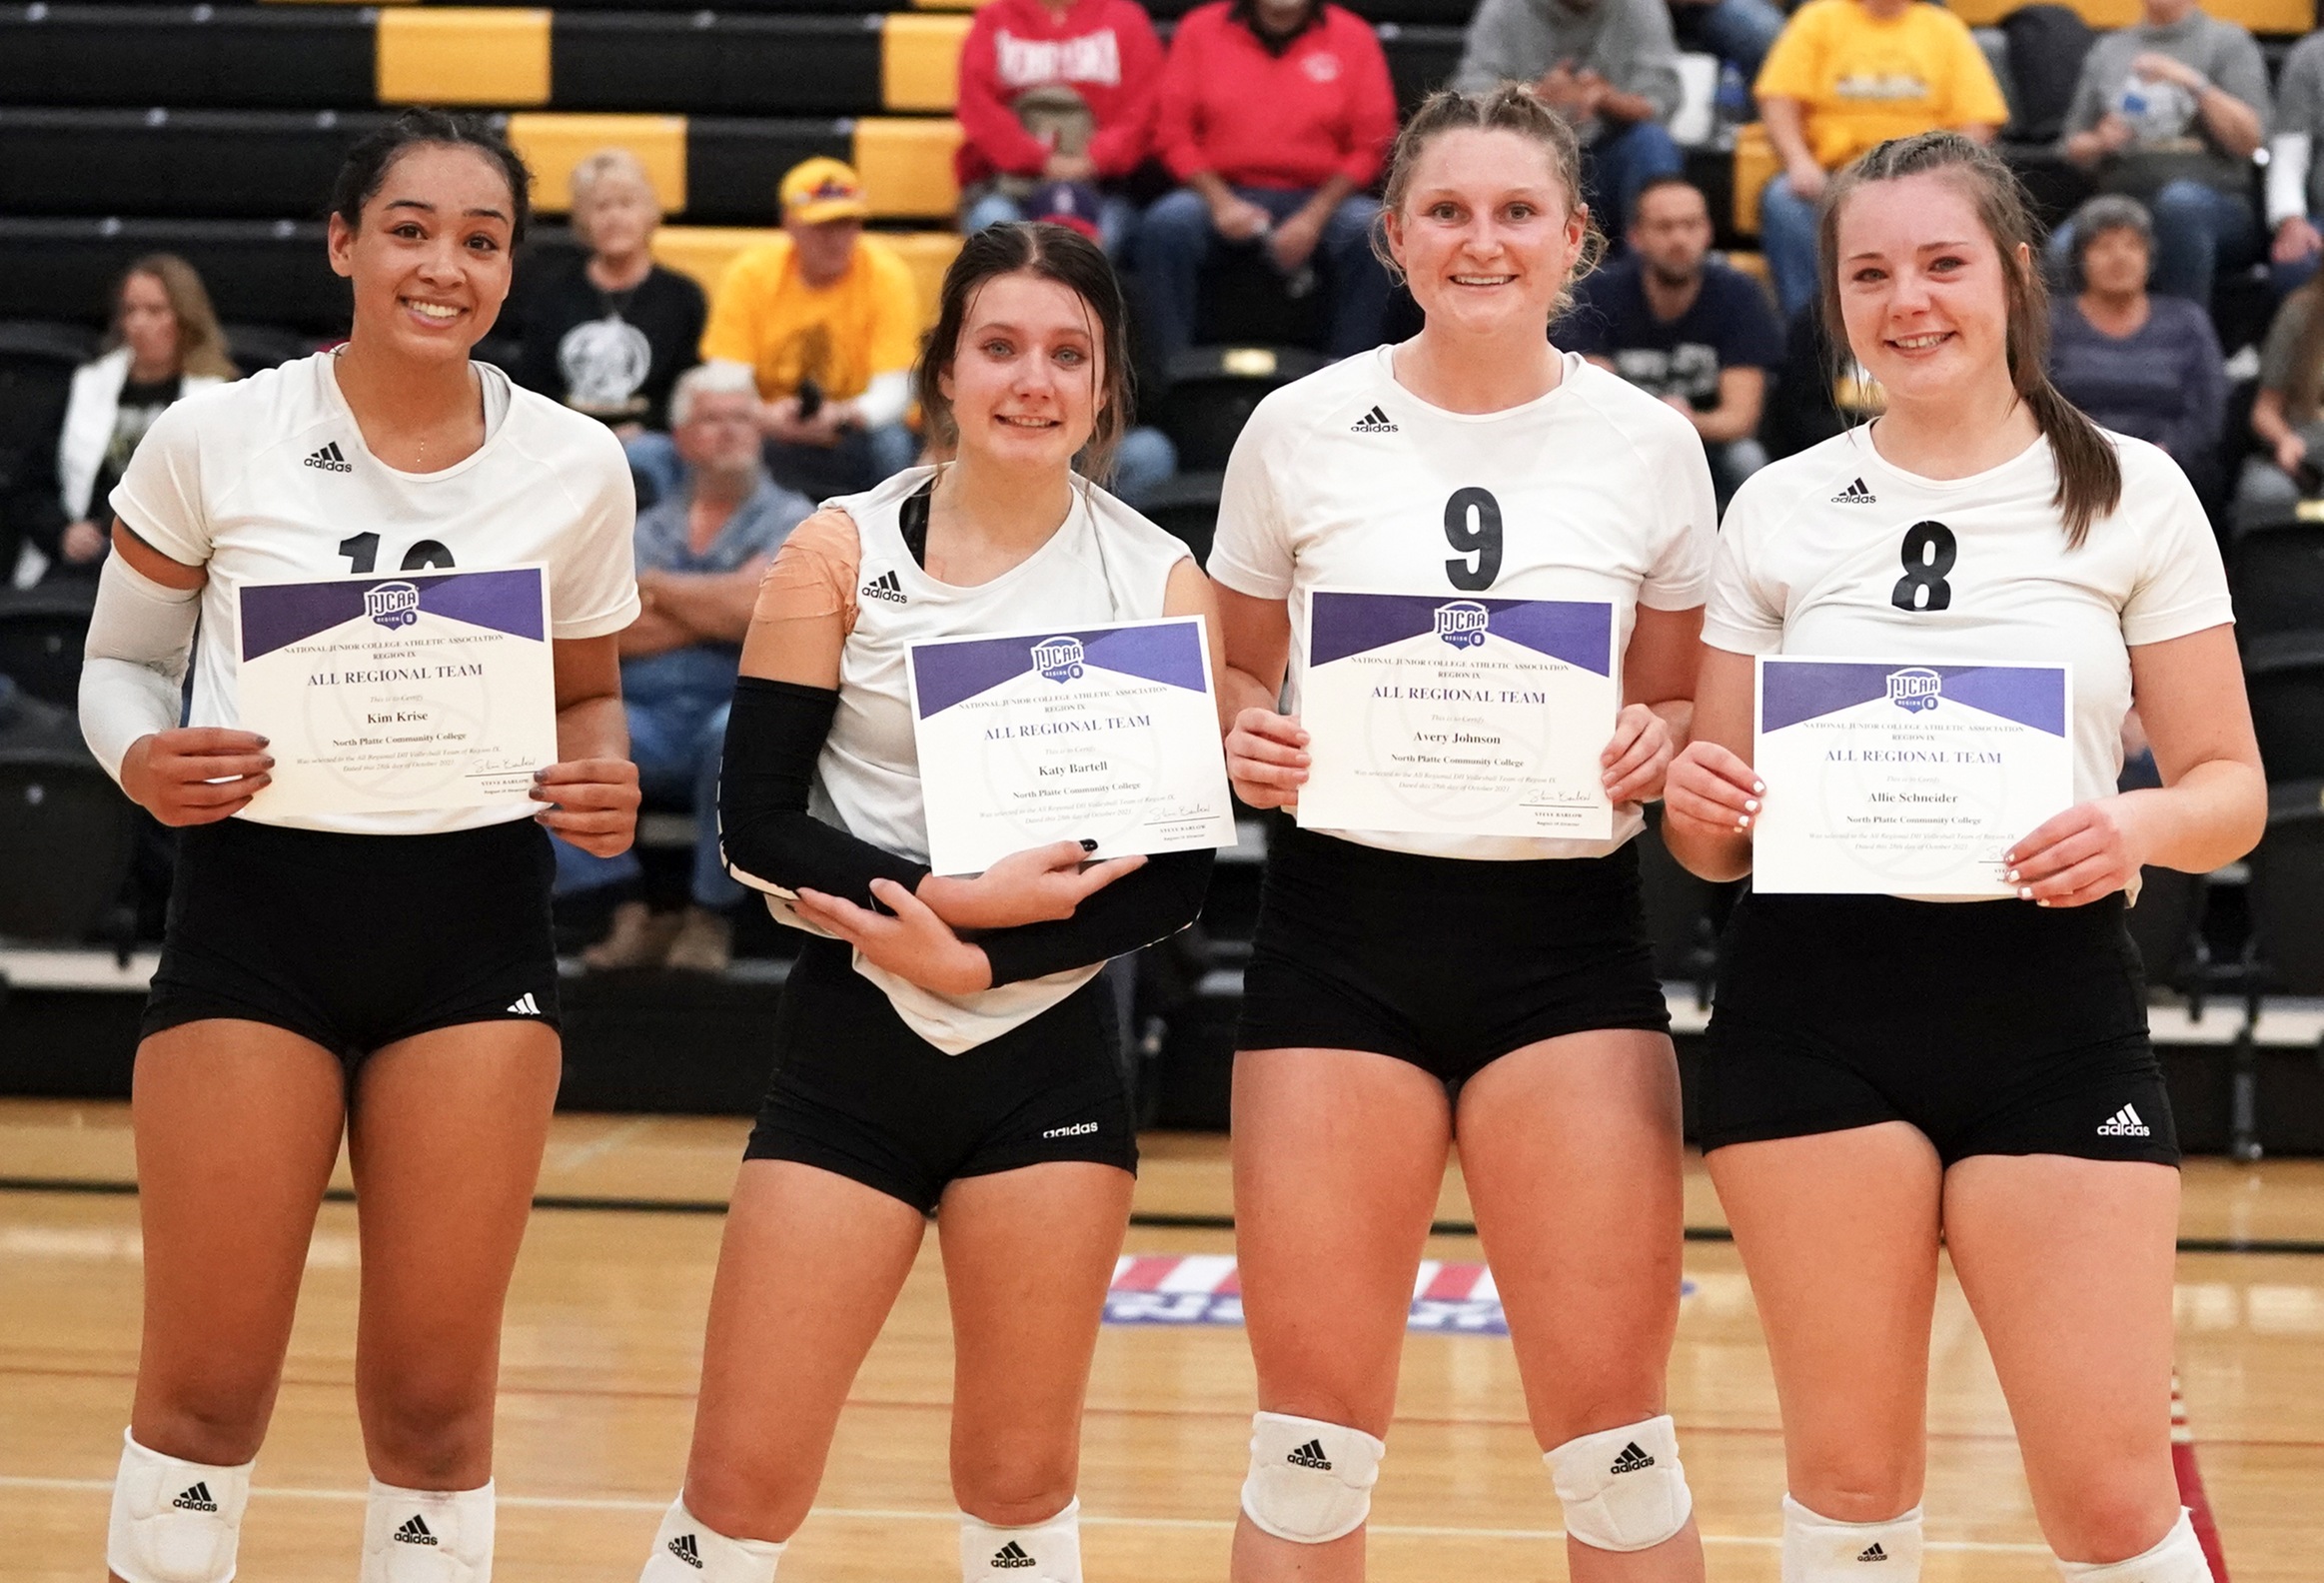 Four NPCC volleyball players named to All-Region Team